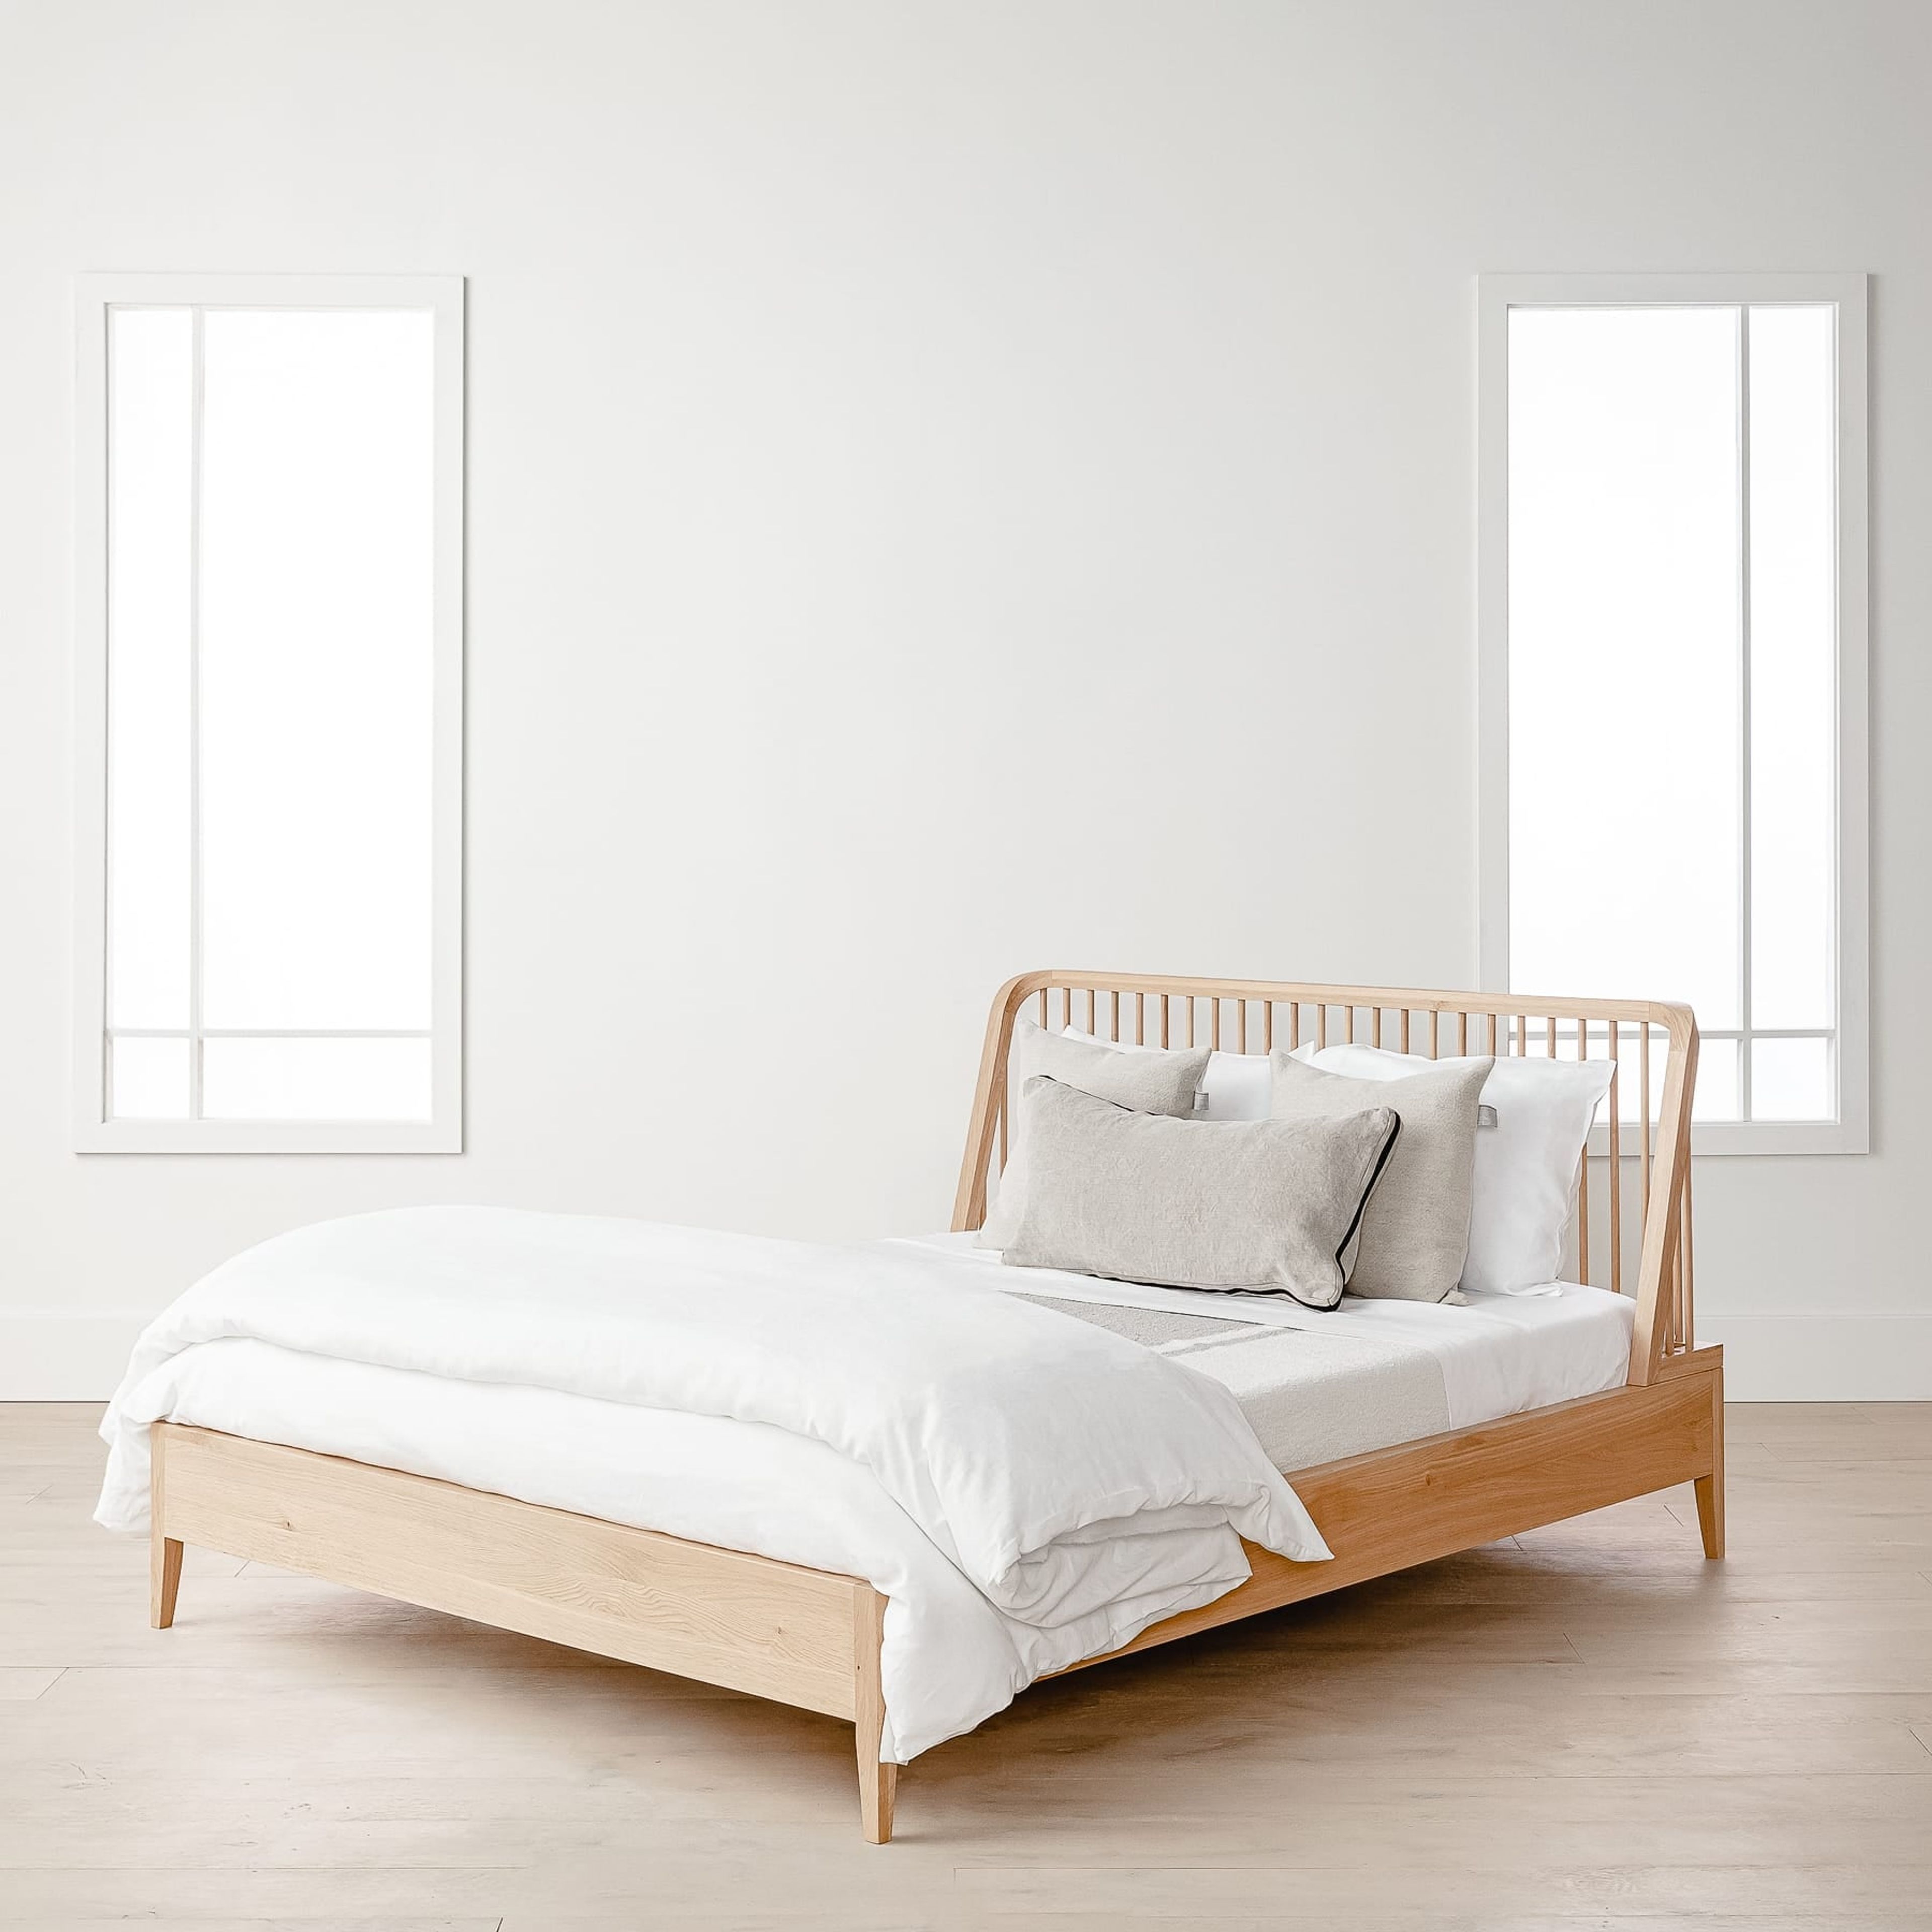 Addison Spindle Bed